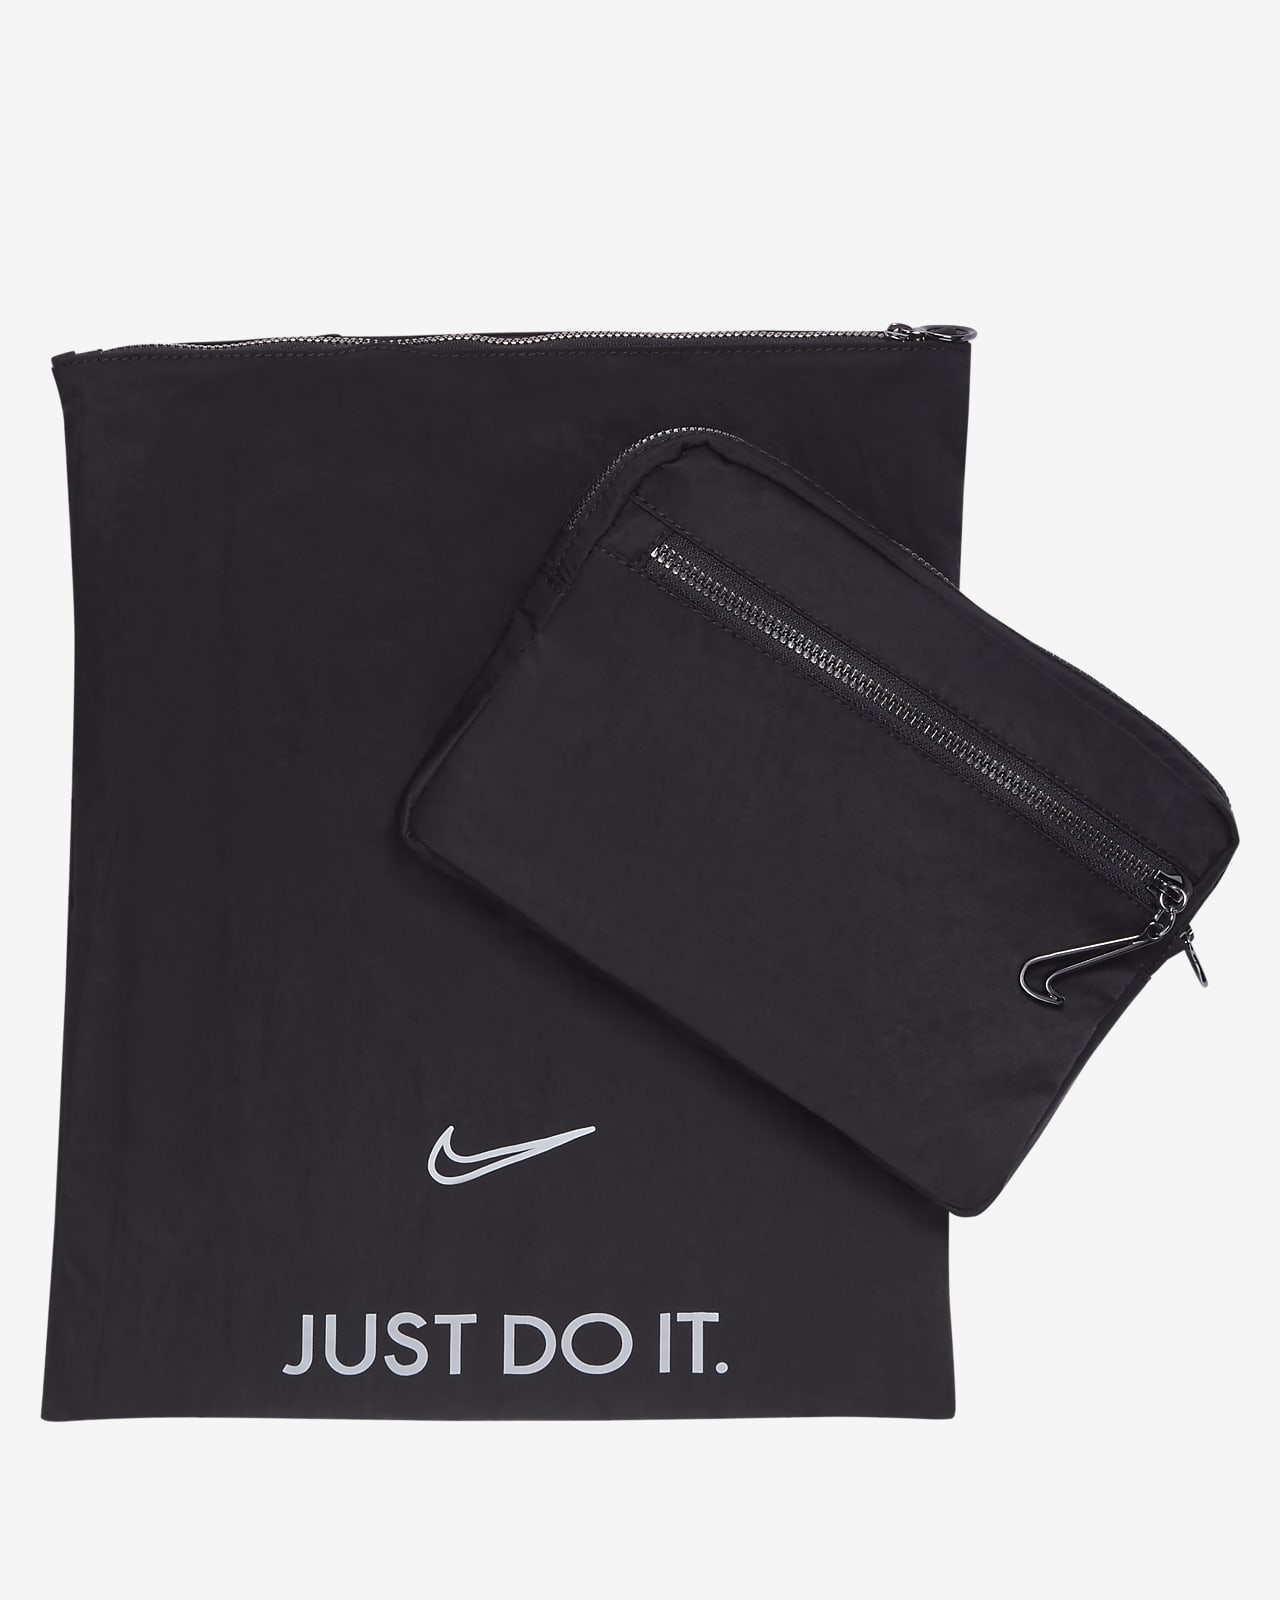 nike valuables pouch